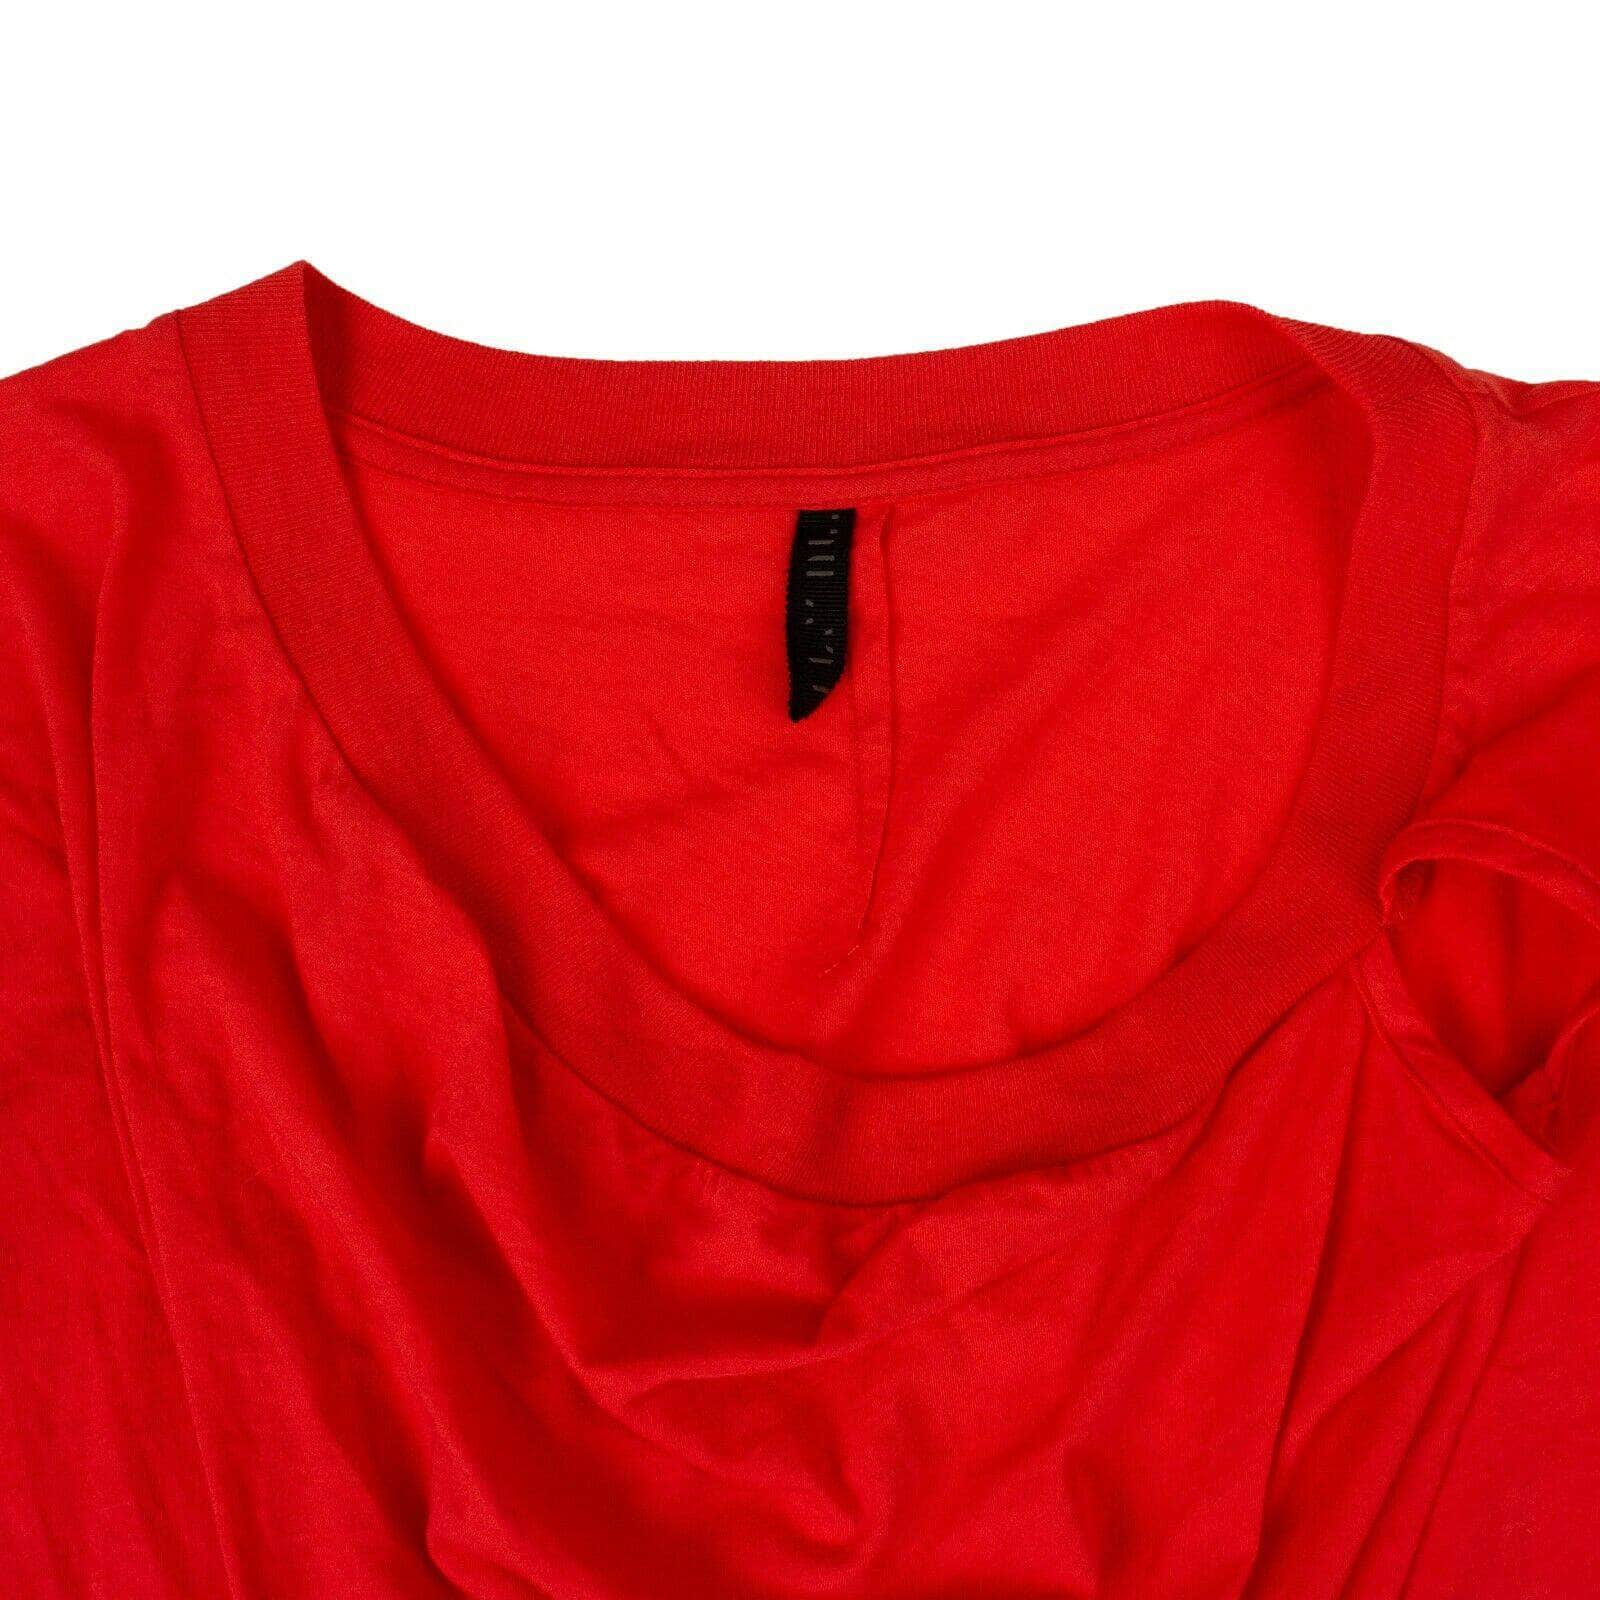 UNRAVEL PROJECT channelenable-all, couponcollection, gender-womens, main-clothing, sale-enable, size-s, size-xs, under-250, unravel-project S Red Knot Detailed T-Shirt 82NGG-UN-1050/S 82NGG-UN-1050/S